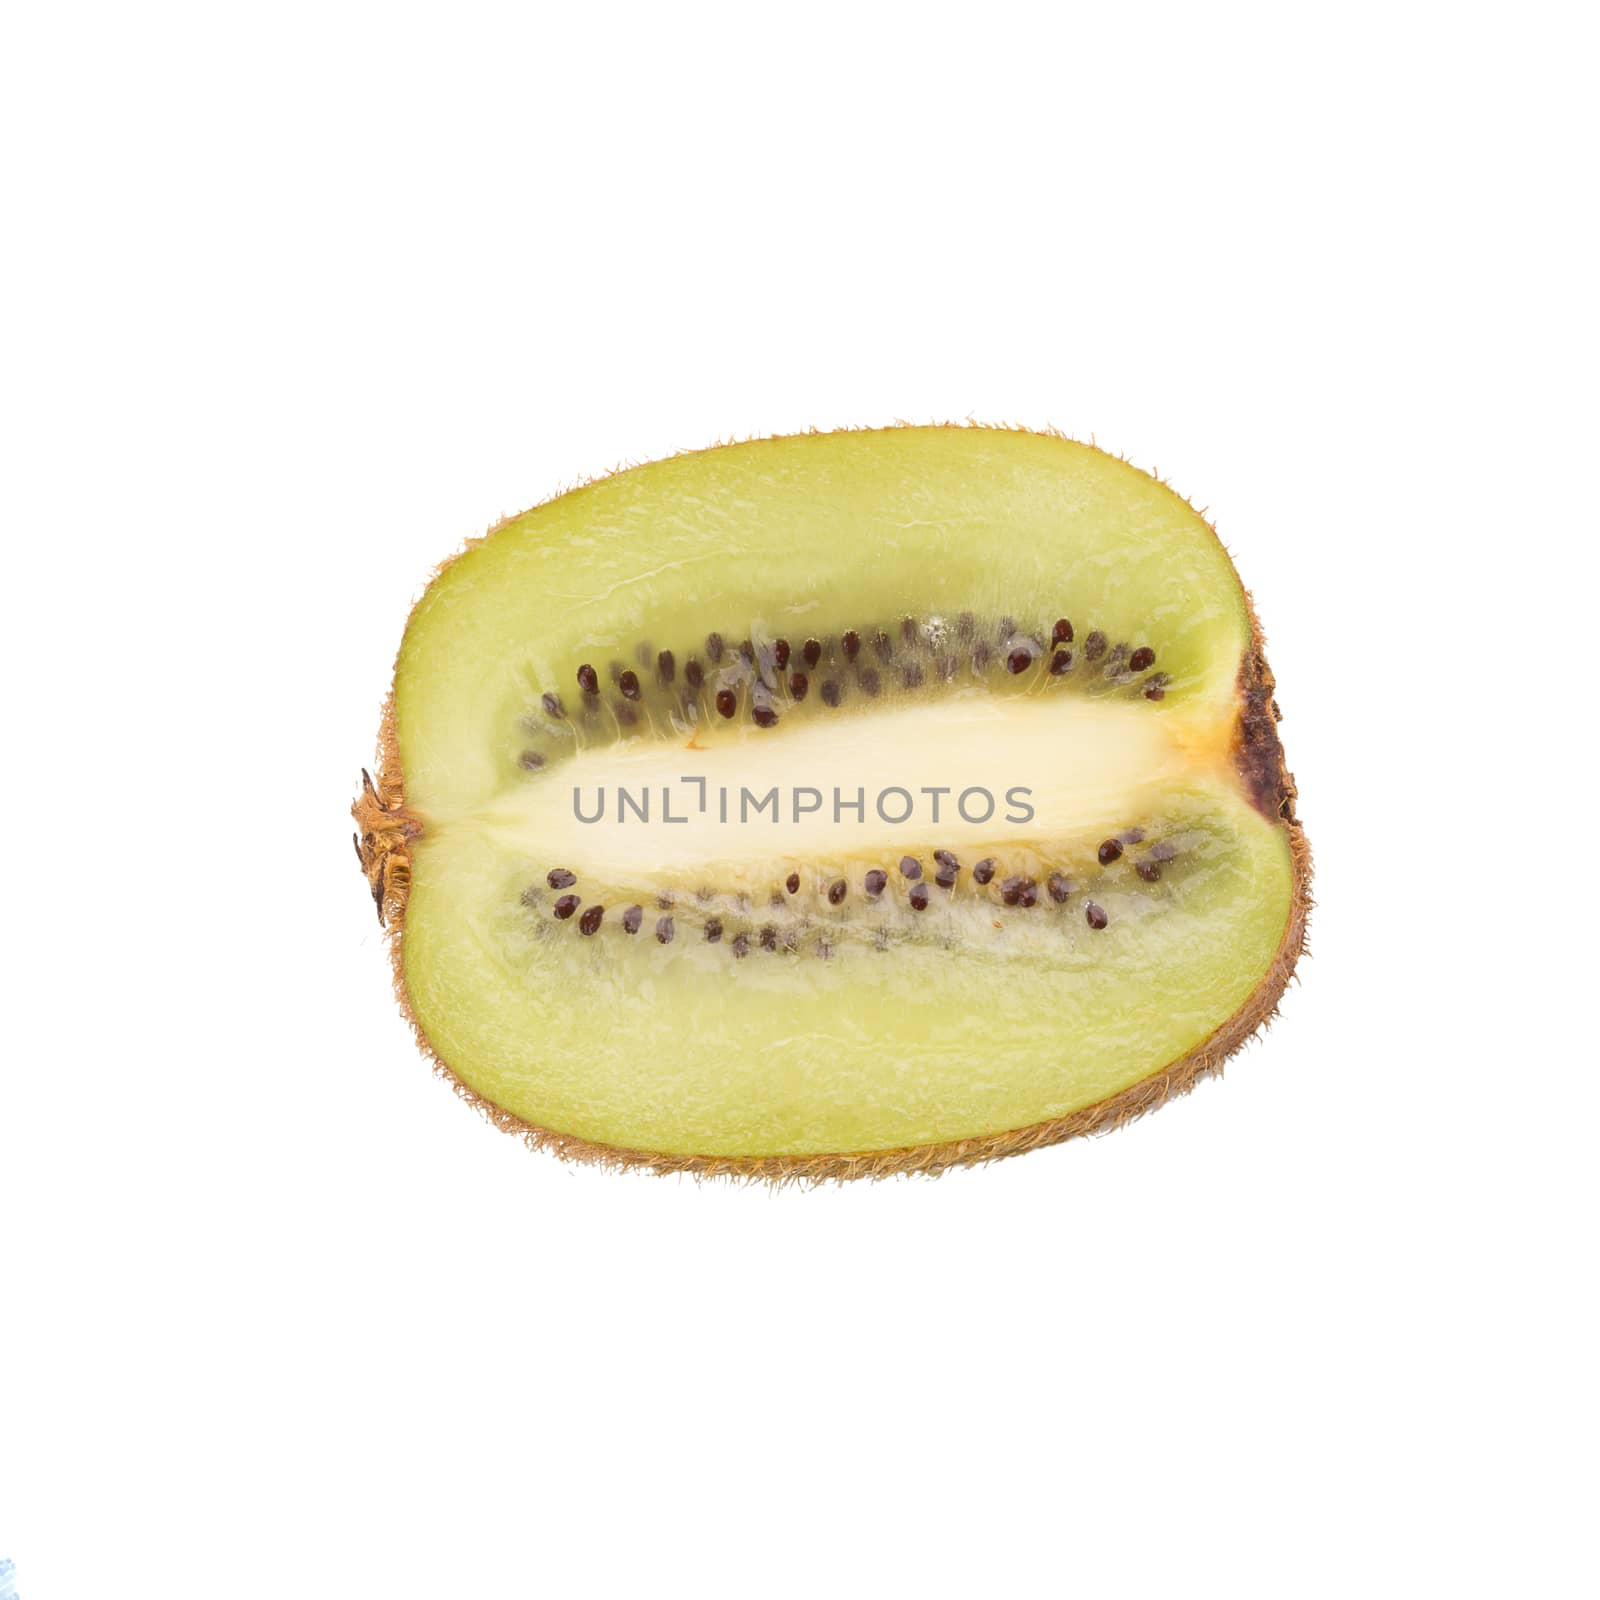 Slice of kiwi isolated on white background, top view by kaiskynet